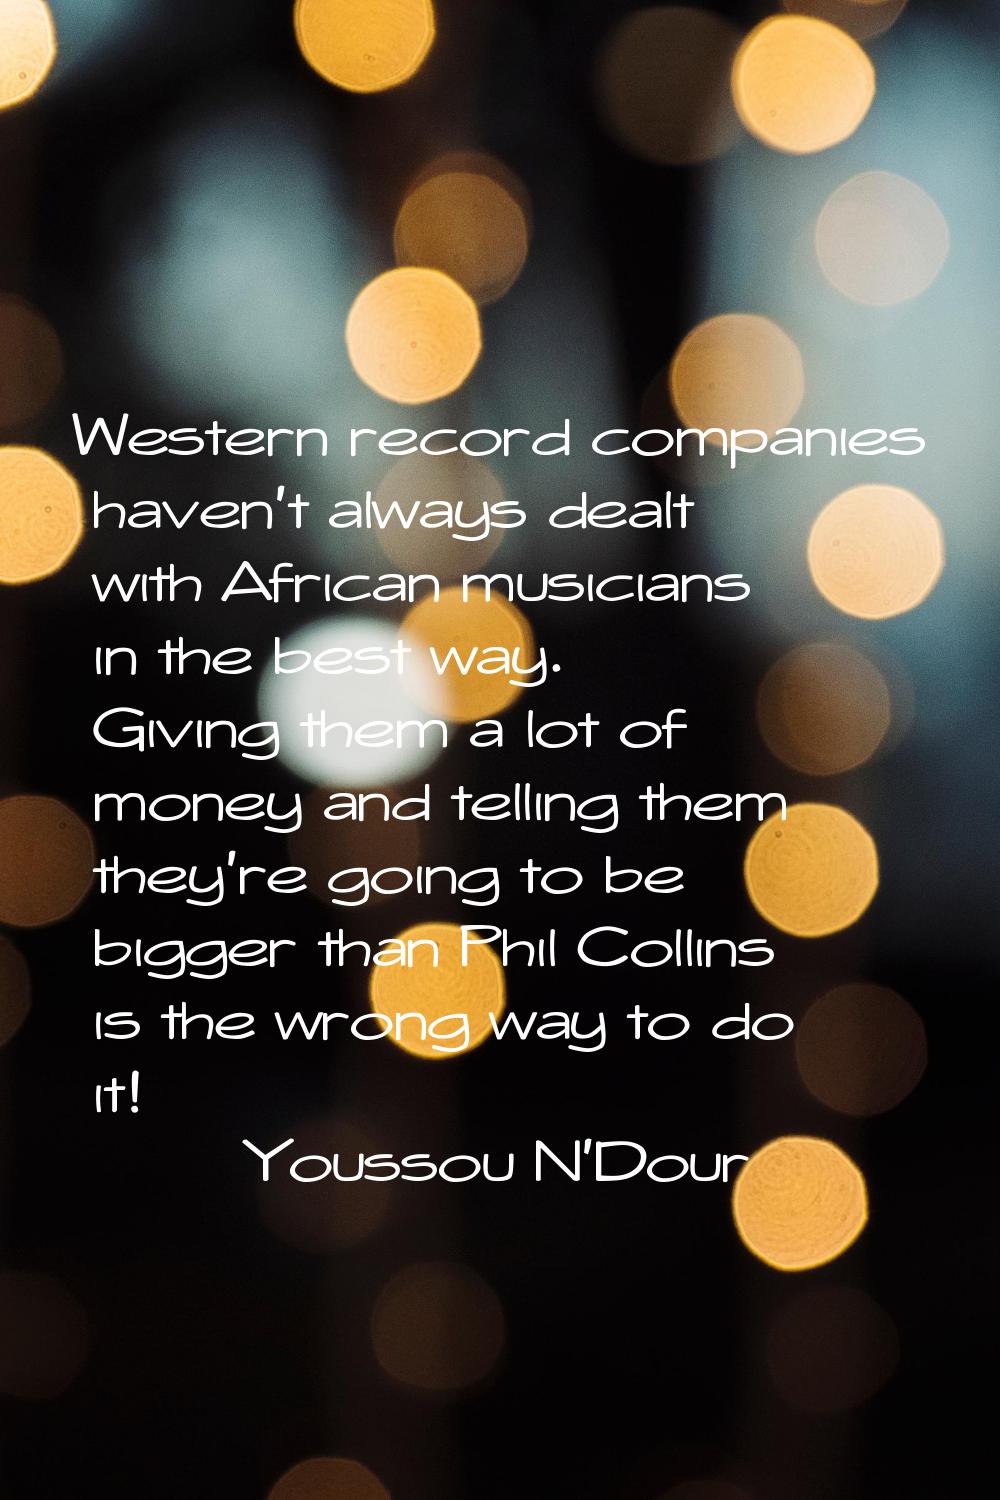 Western record companies haven't always dealt with African musicians in the best way. Giving them a